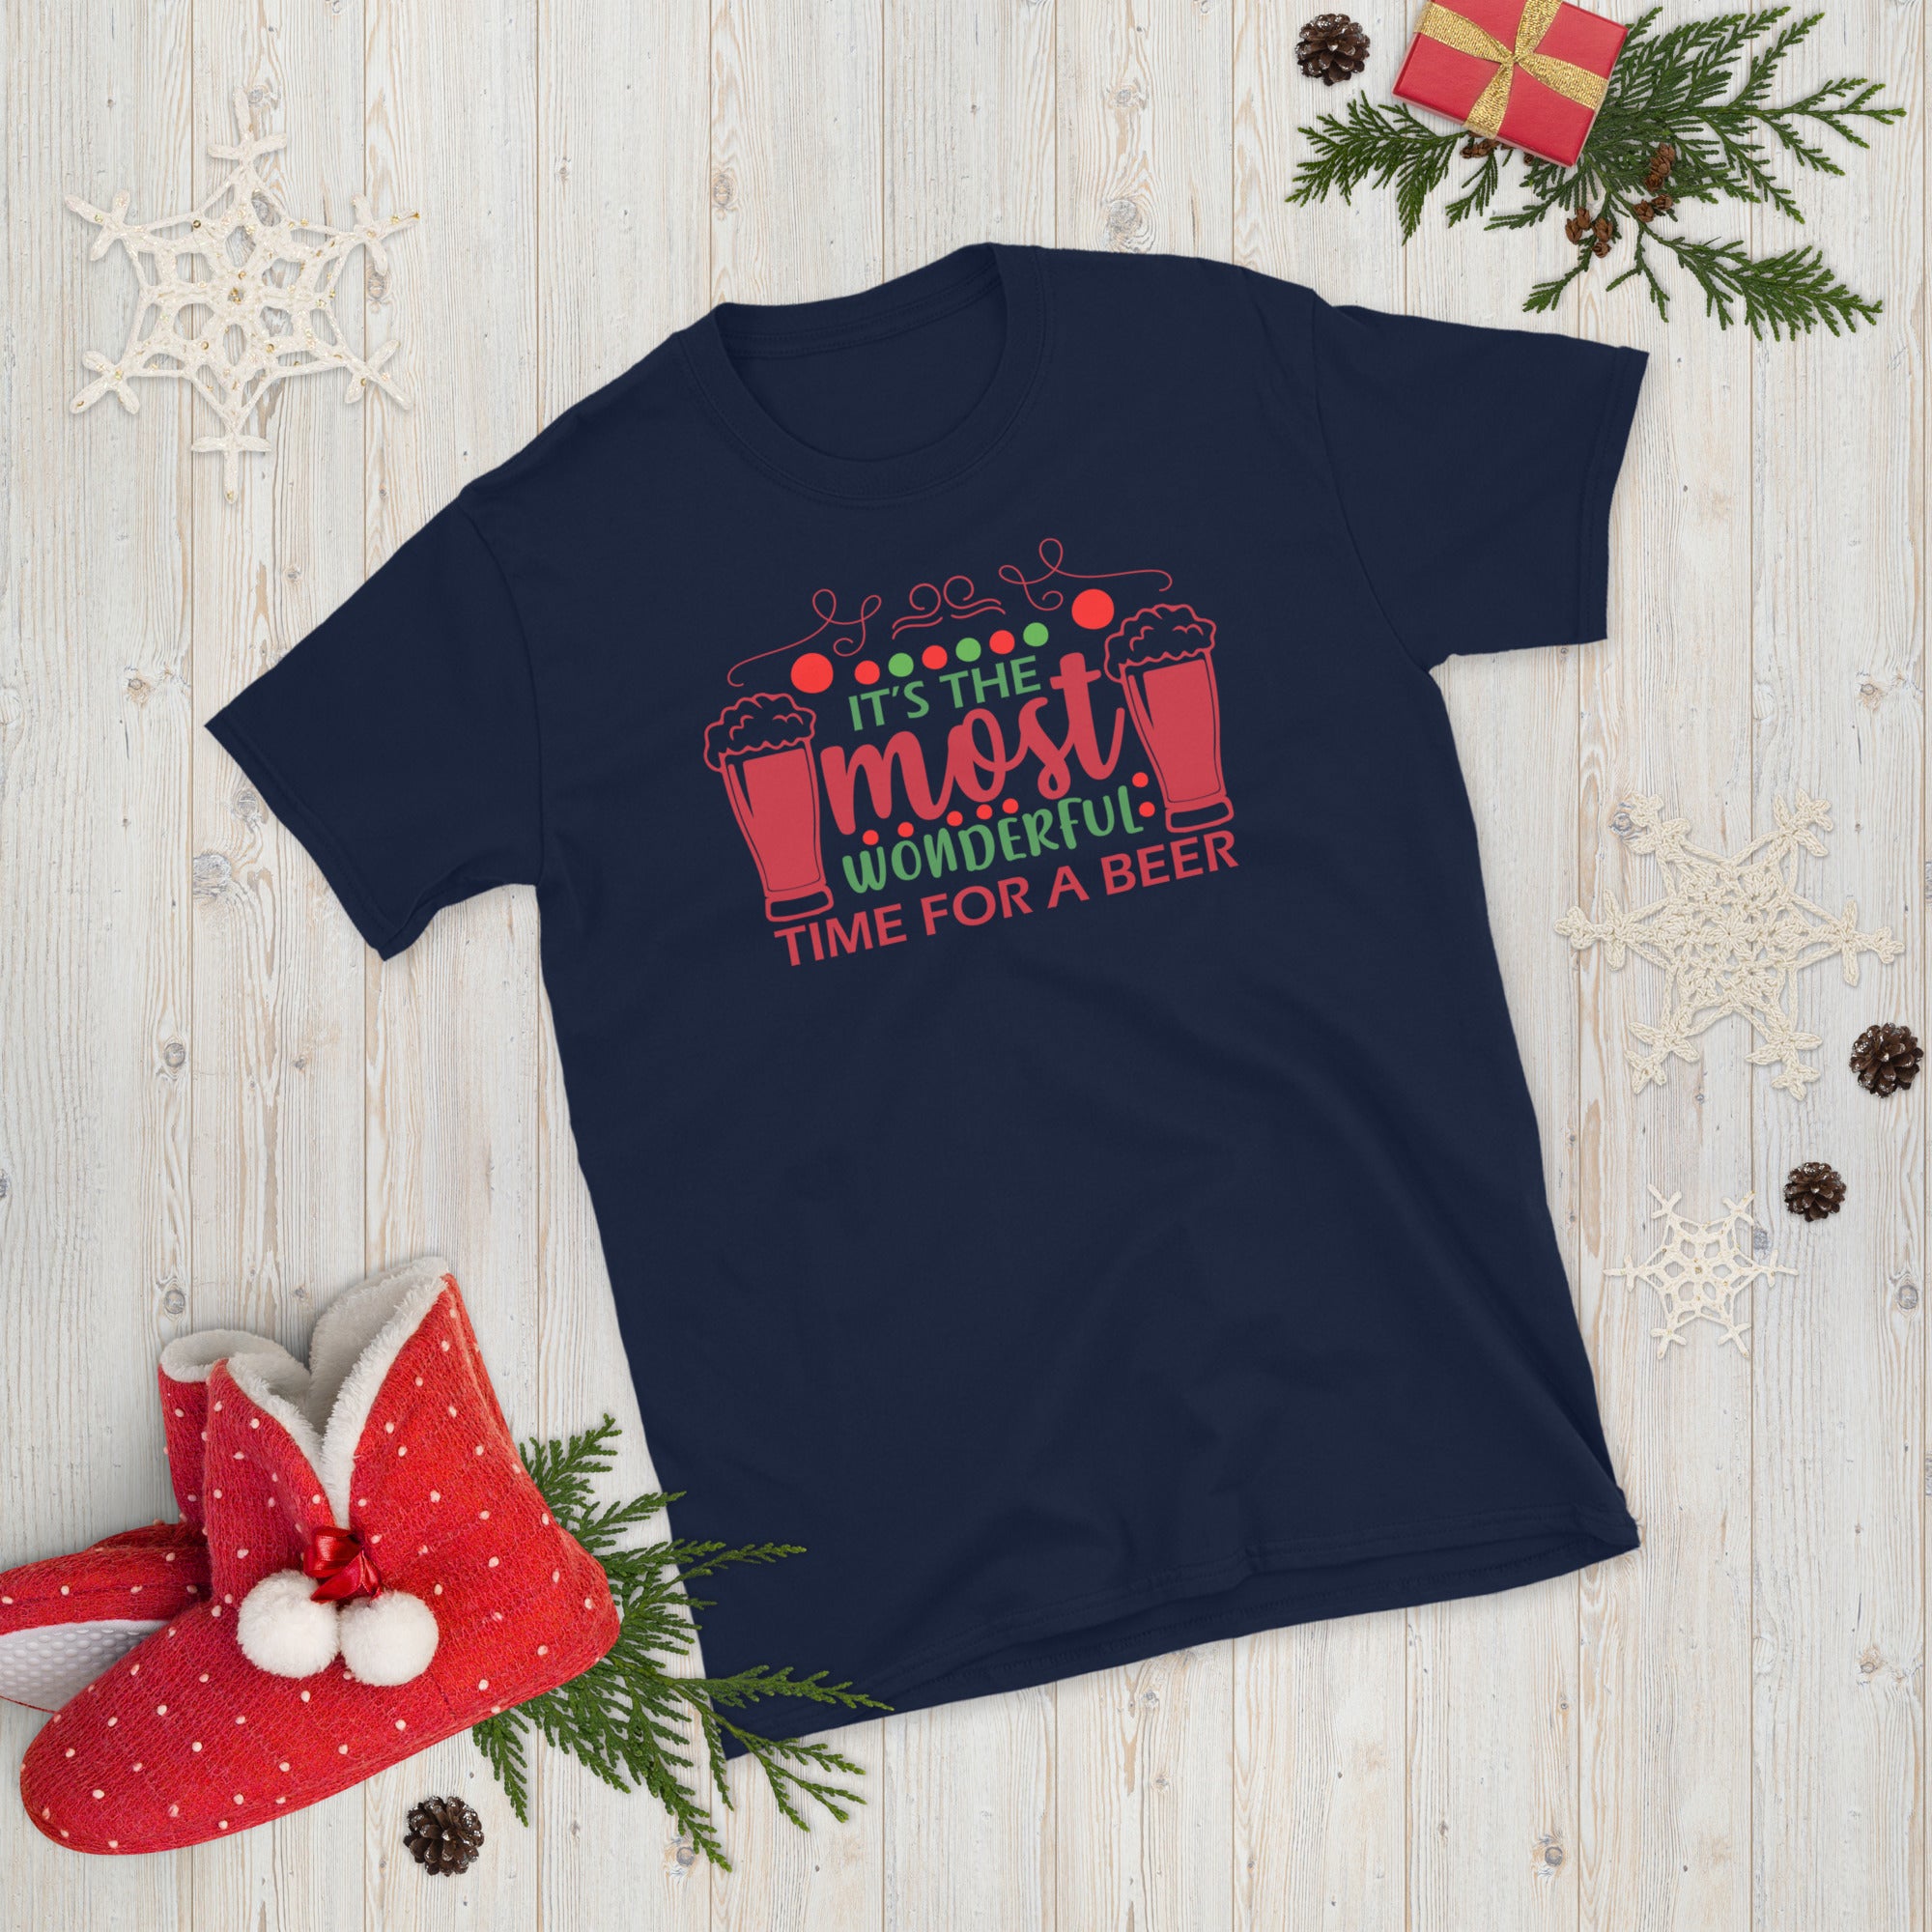 Most Wonderful Time for a Beer, Christmas Beer Shirt, Husband Christmas Gift, Husband Christmas Shirt, Beer Lover Gift, Ugly Christmas Shirt - Madeinsea©